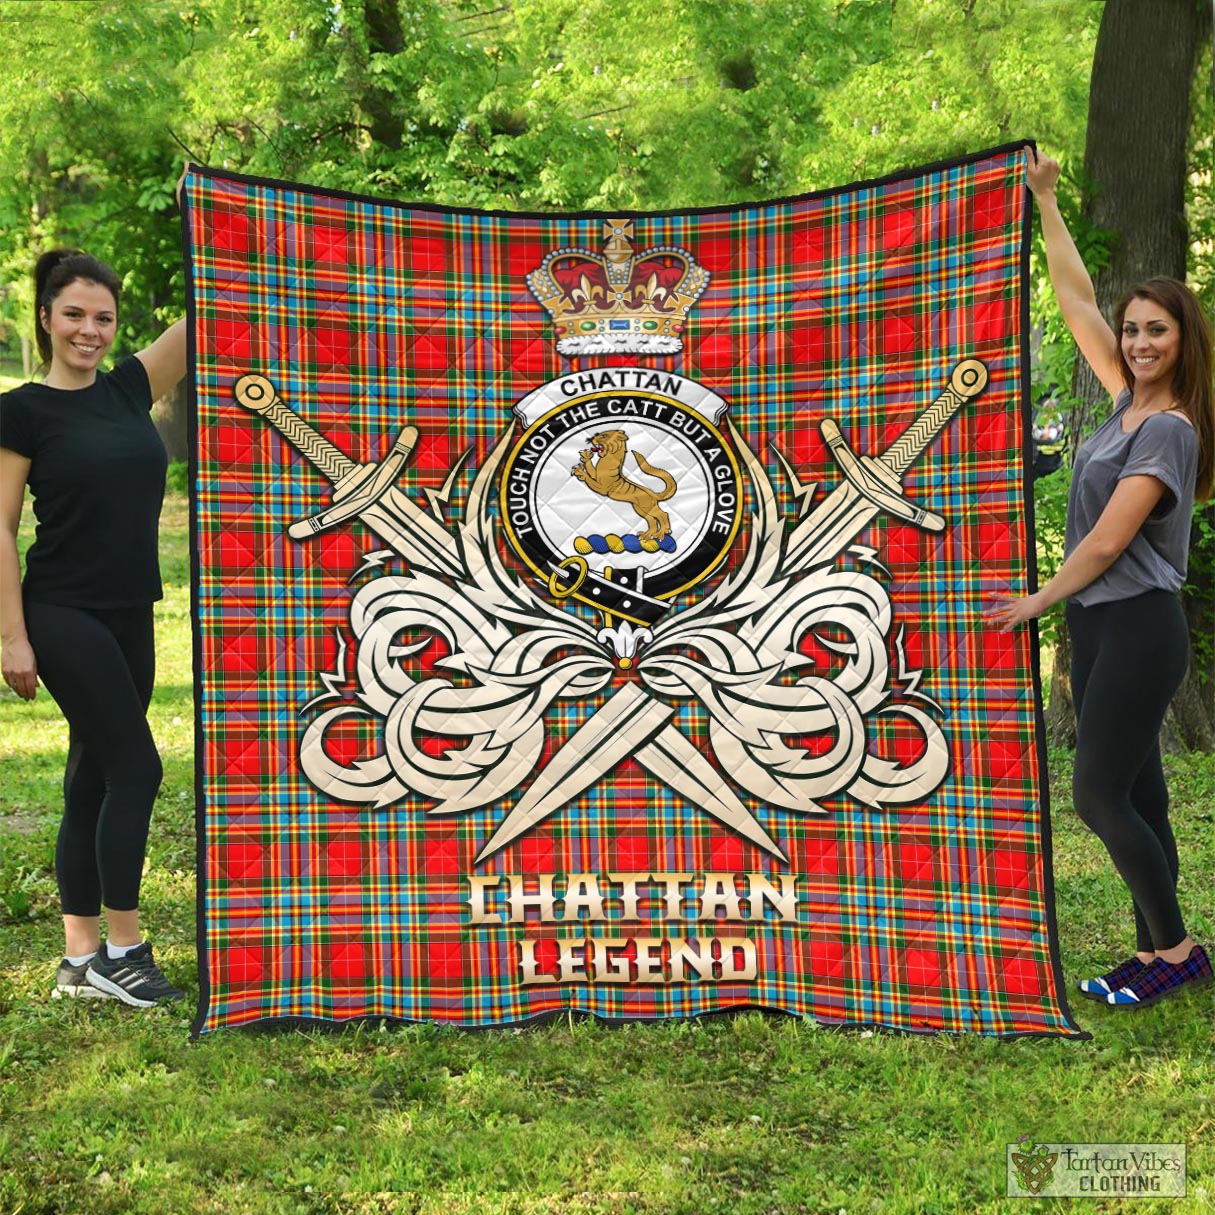 Tartan Vibes Clothing Chattan Tartan Quilt with Clan Crest and the Golden Sword of Courageous Legacy